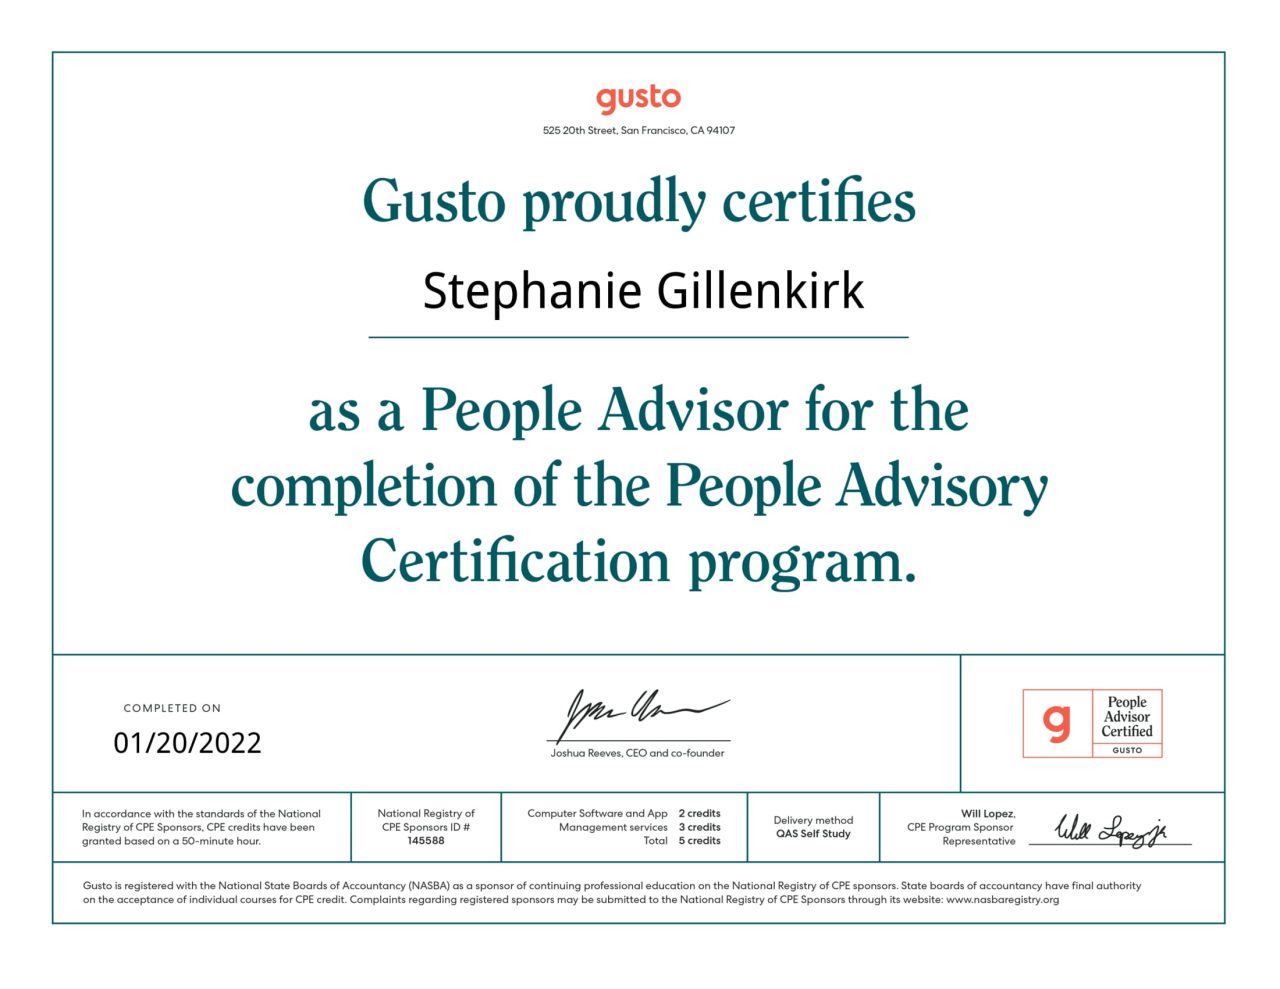 Gusto_PA certification